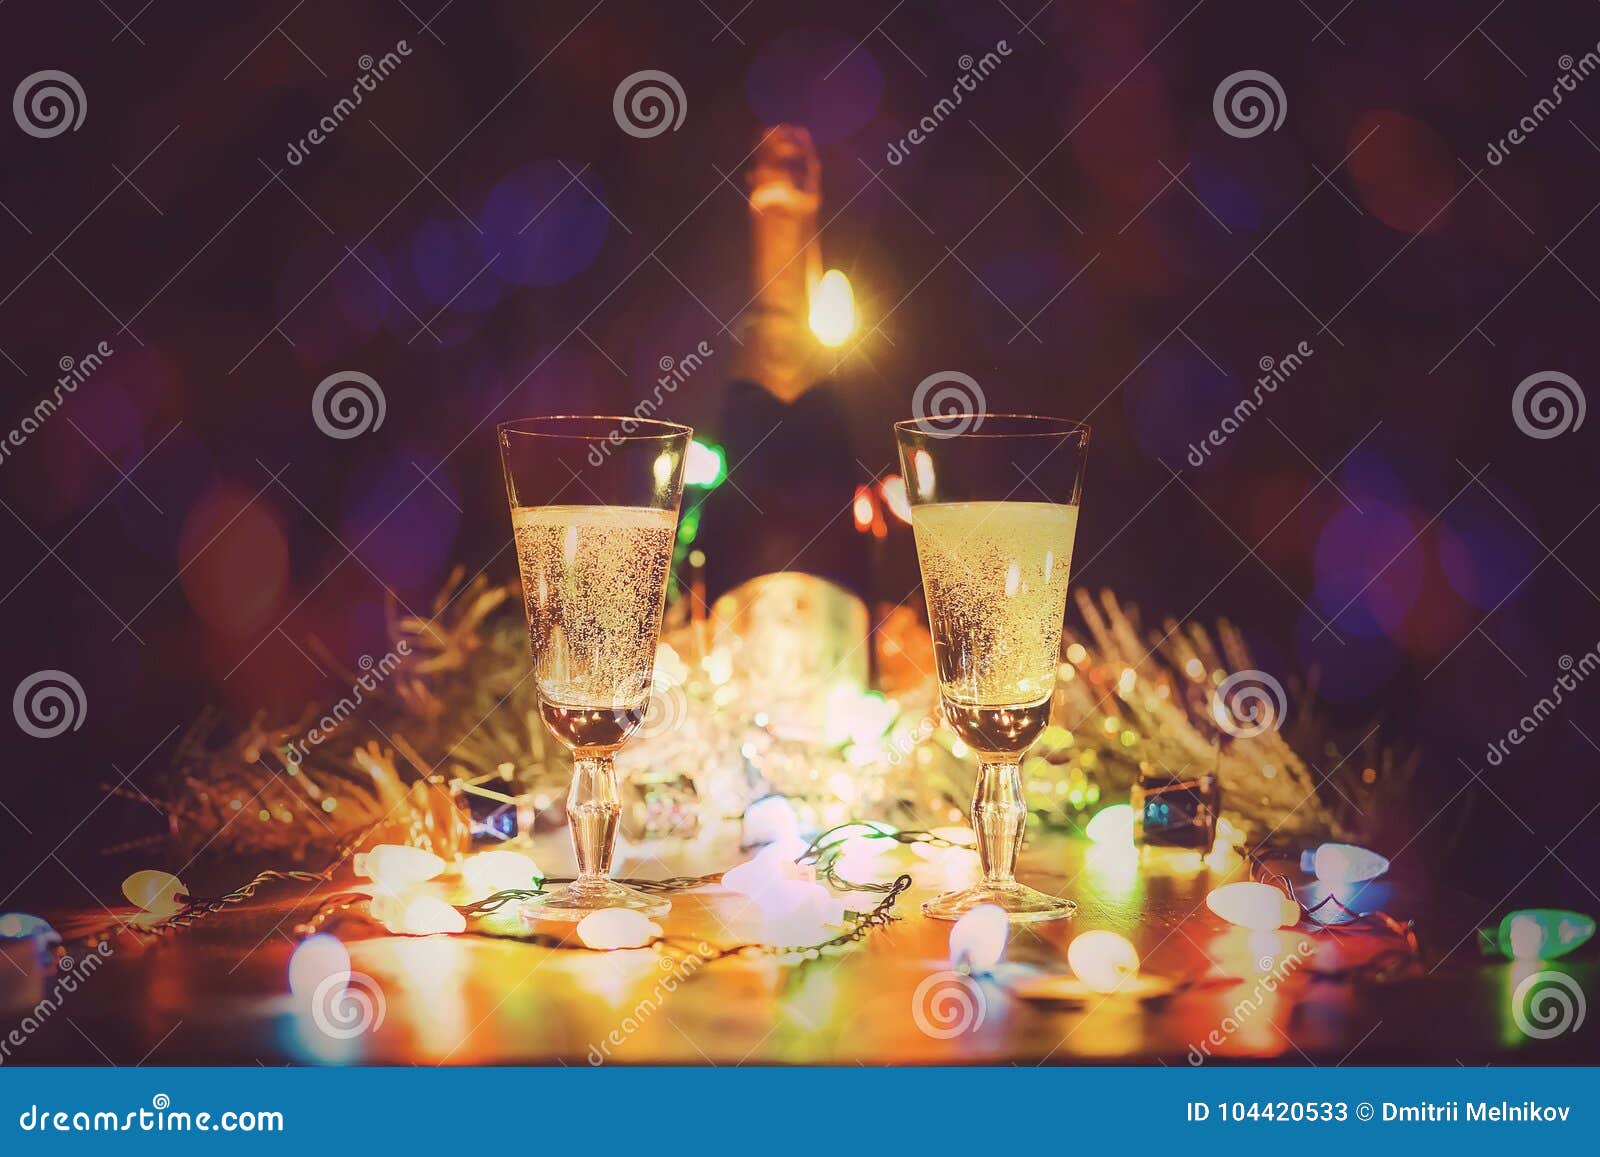 Two champagne flutes toasting, illustration - Stock Image - C039/6136 -  Science Photo Library